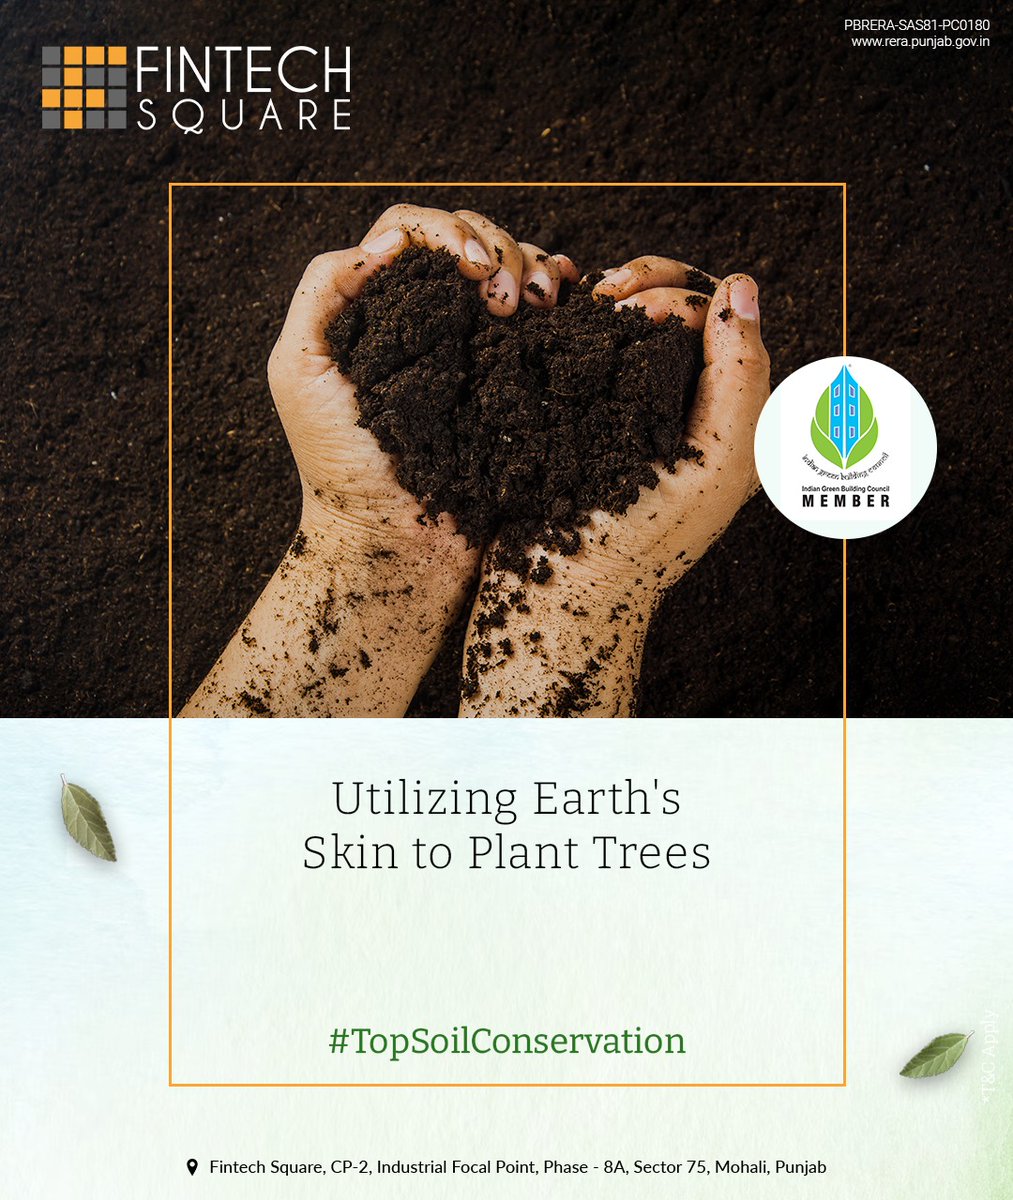 Fintech Square is working on preserving the planet's fertility and safeguarding topsoil through Top Soil Conservation.    

#FintechSquare #TopSoilConservation #ProtectingSoilHealth #SoilSustainability #Work #Celebrate #FoodCourt #StudioApartments #Tricity #Sector75 #Mohali